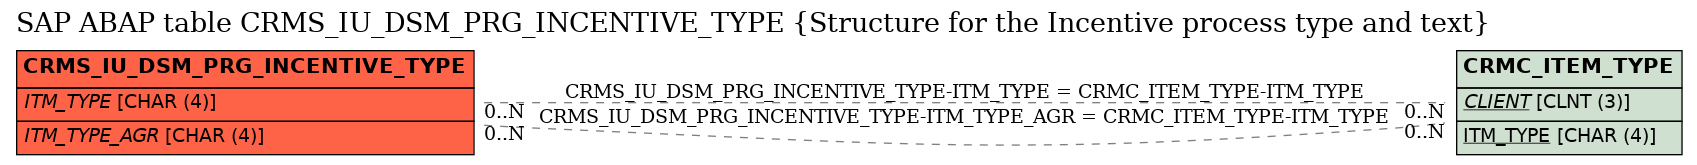 E-R Diagram for table CRMS_IU_DSM_PRG_INCENTIVE_TYPE (Structure for the Incentive process type and text)